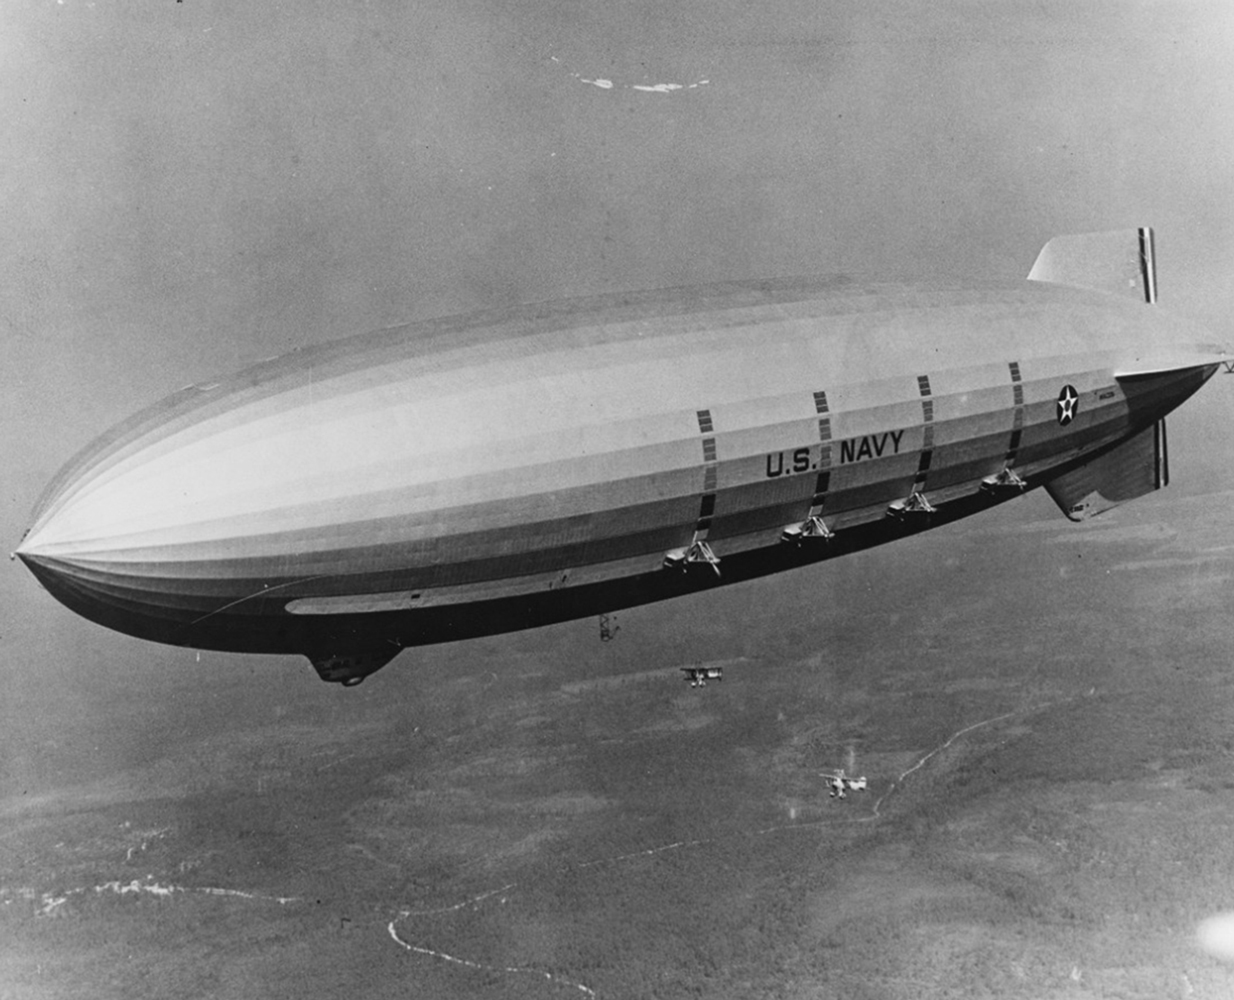 The USS Macon dirigible soars high above an open landscape. Two small planes that were deployed from the belly of the Macon, fly below the airship.